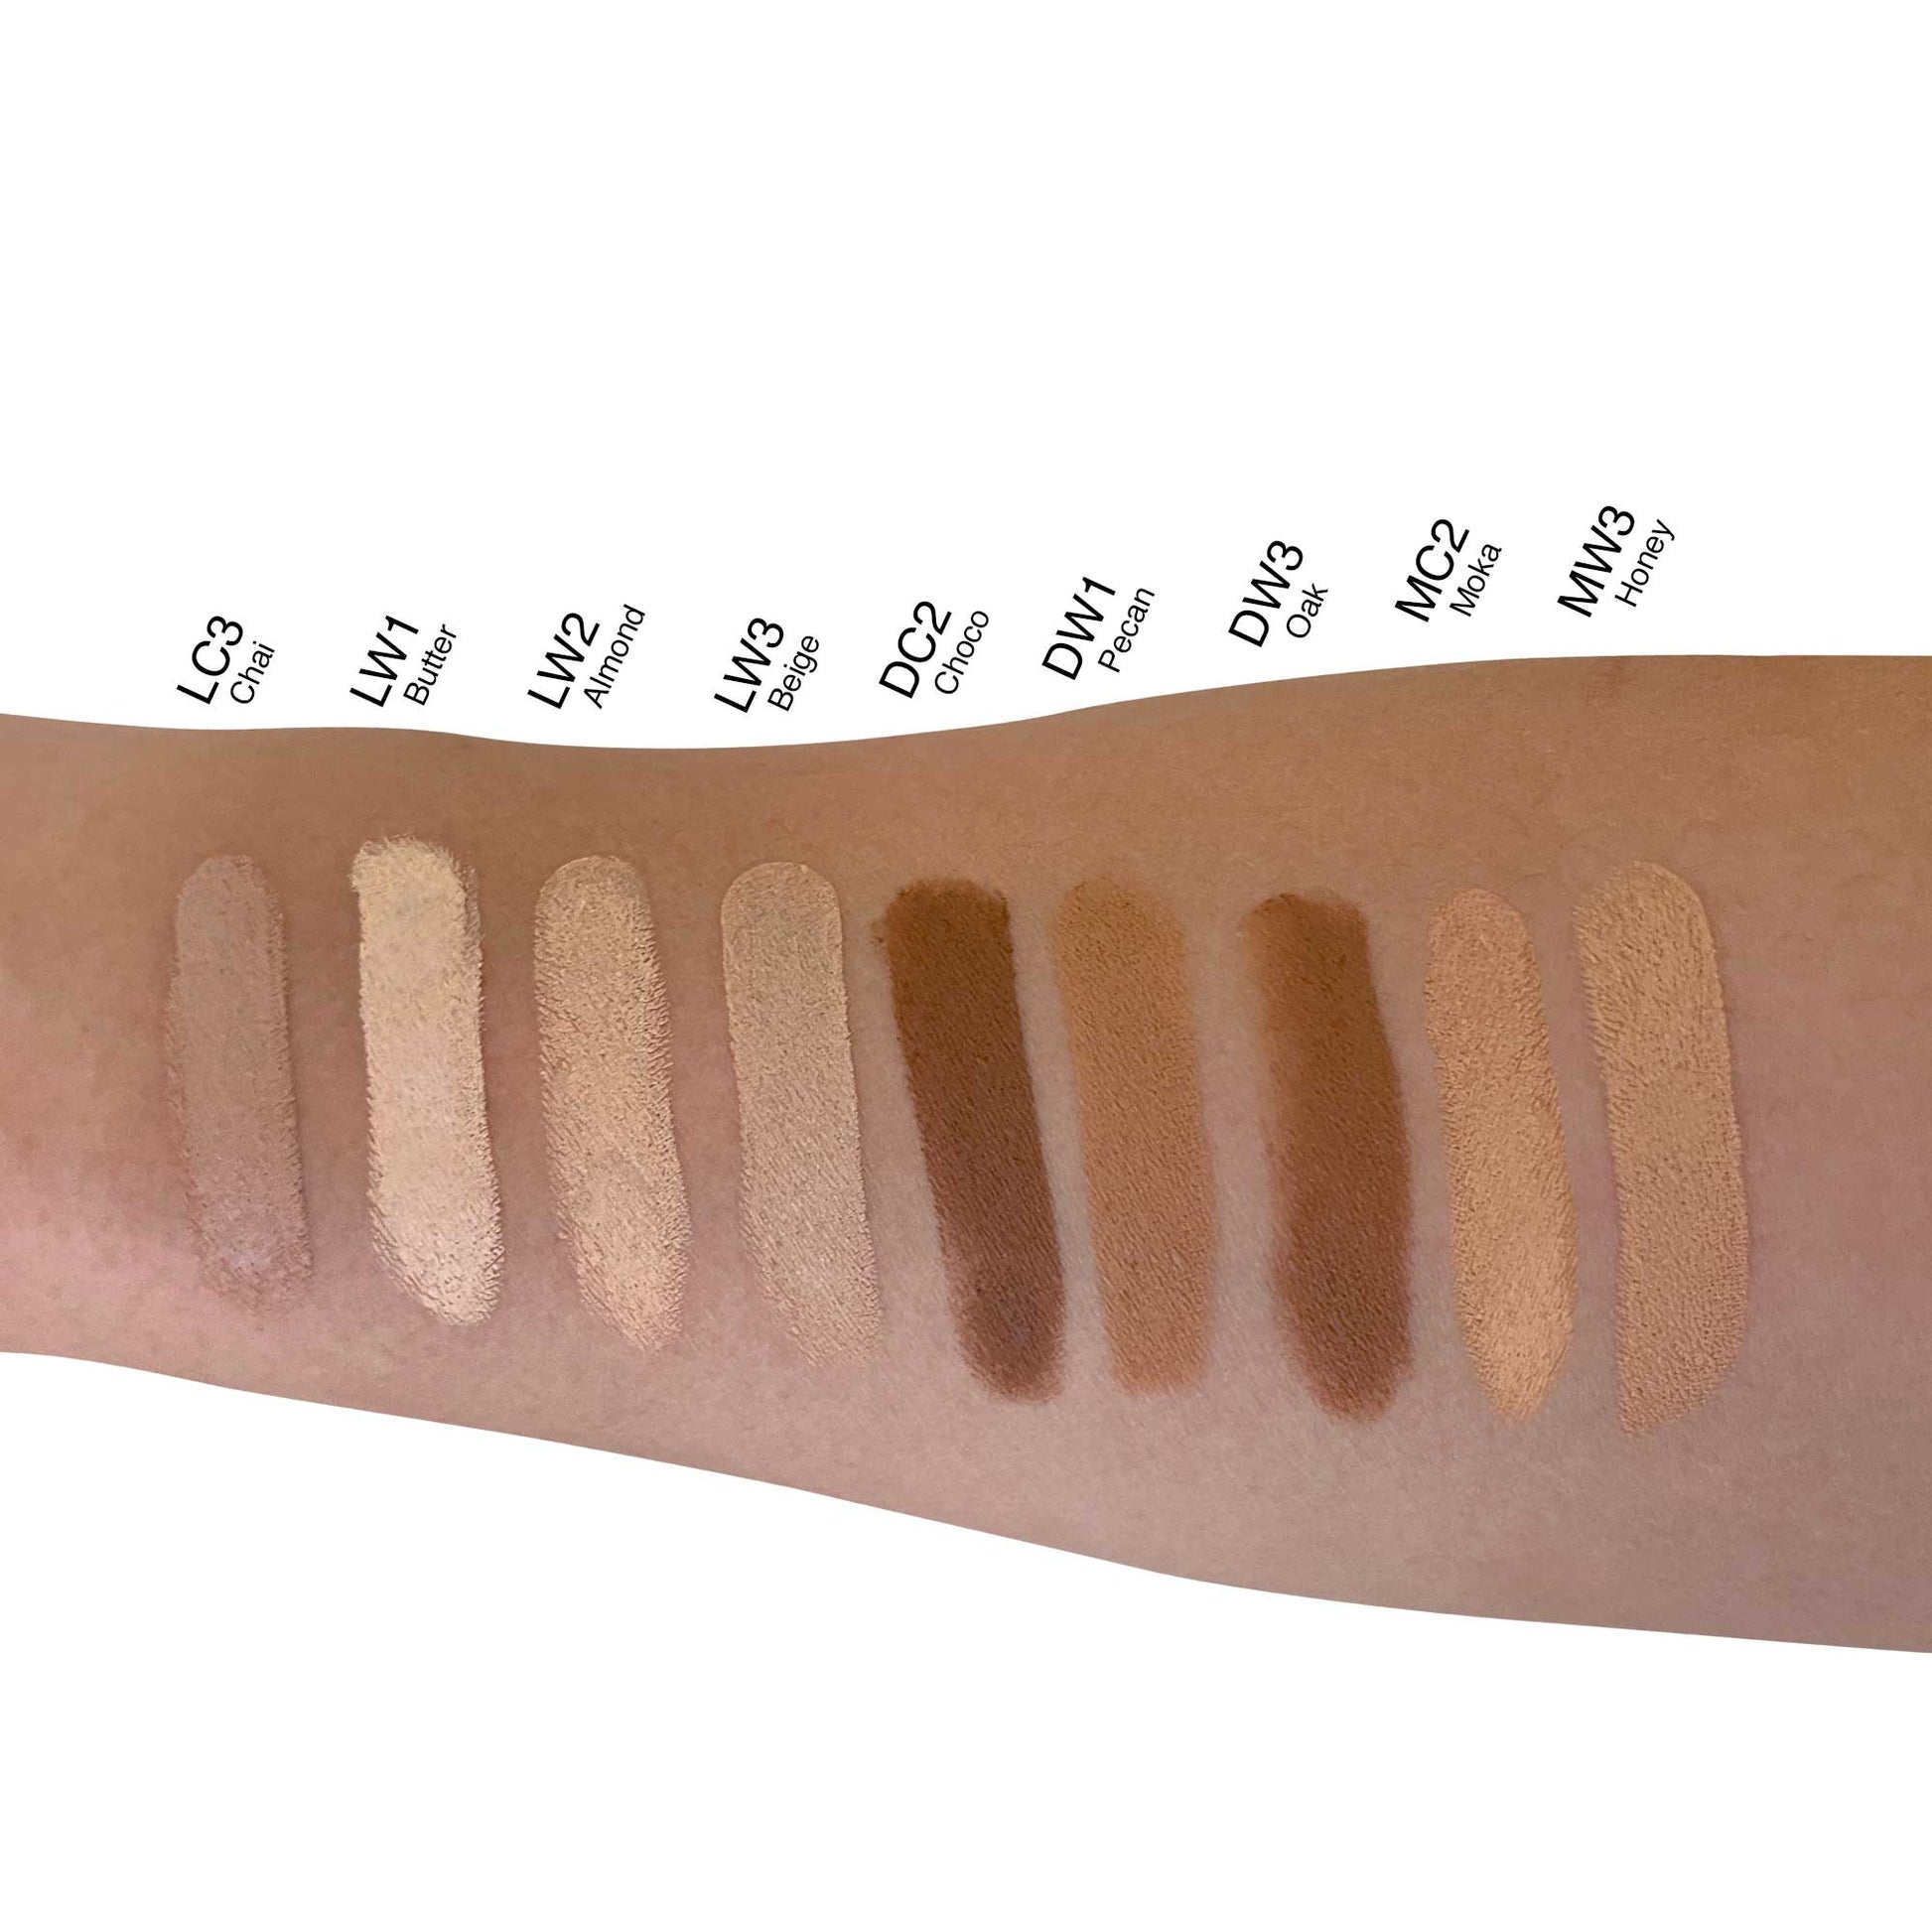 Different shades of Creme Concealer Stick moka foundation displayed on an arm.